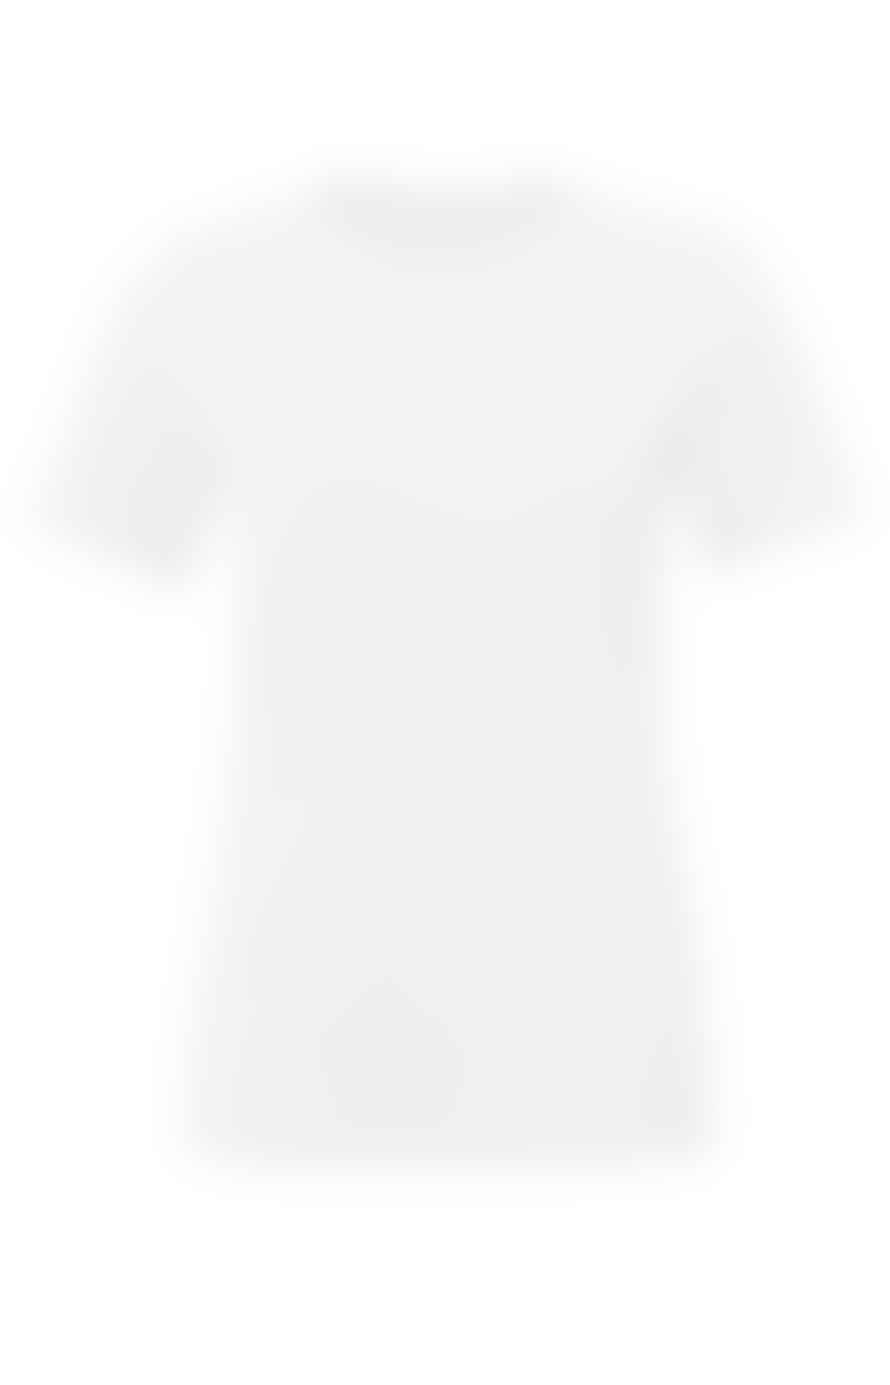 Yaya T-shirt With Crewneck And Short Sleeves In A Reg Fit | Pure White